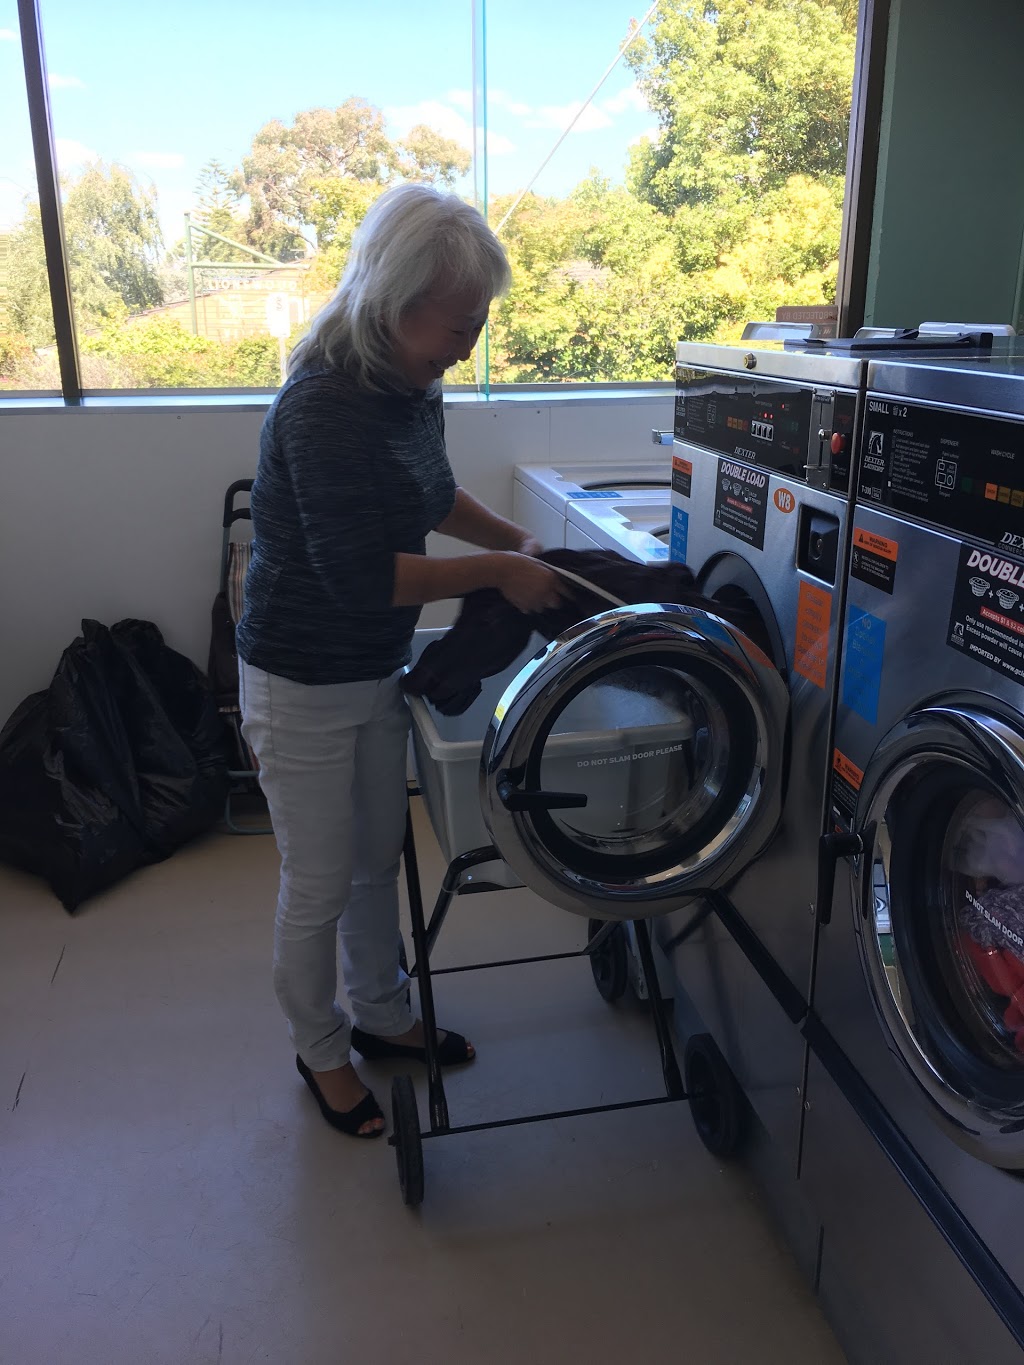 Ringwood The Cleaners Laundrette | laundry | 1/54 Wantirna Rd, Ringwood VIC 3134, Australia | 0415190053 OR +61 415 190 053